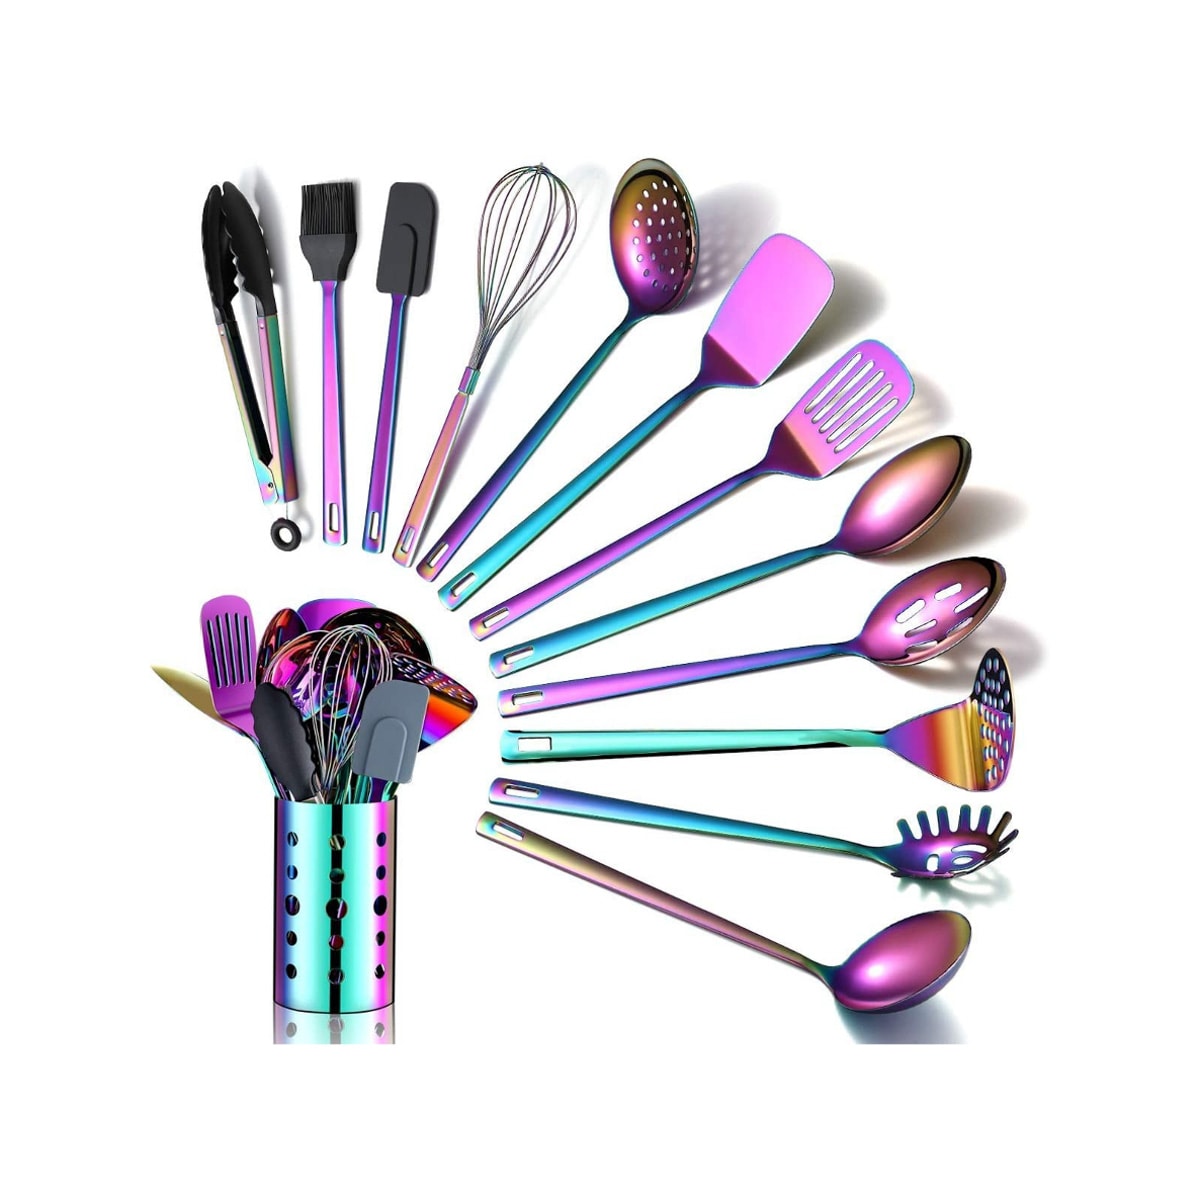 A set of metal, rainbow-colored cooking utensils with a matching holder.